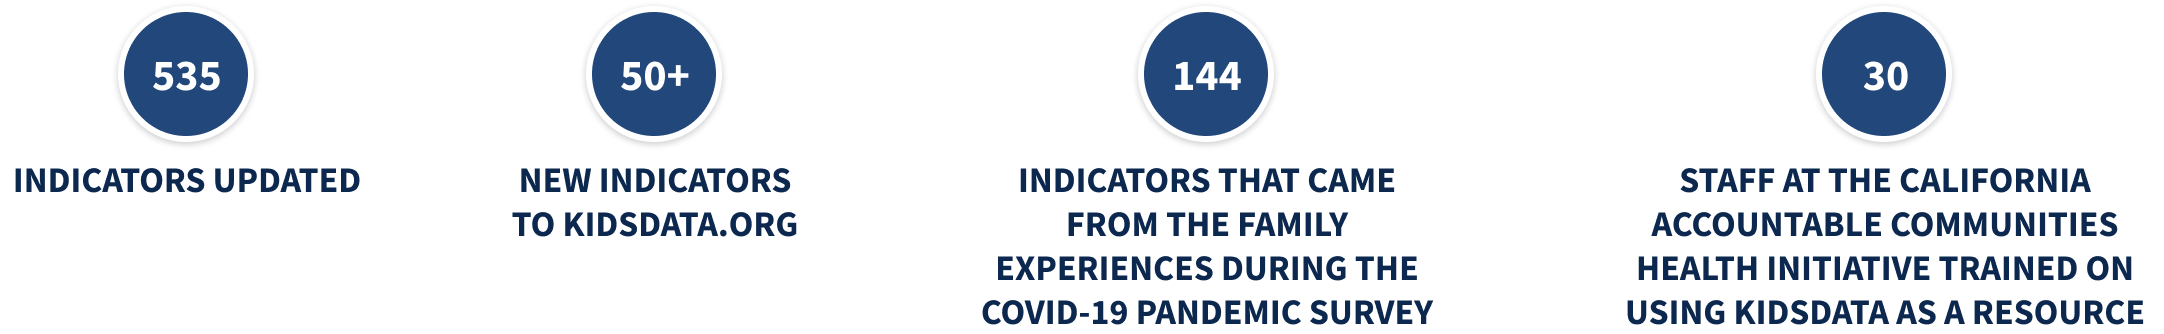 Key results from KidsData: 535 Indicators updated; 50+ new indicators to kidsdata.org; 144 indicators that came from the family experiences during the COVID-19 pandemic survey; 30 staff at the California Accountable Communities Health Initiative trained on using KidsData as a resource.